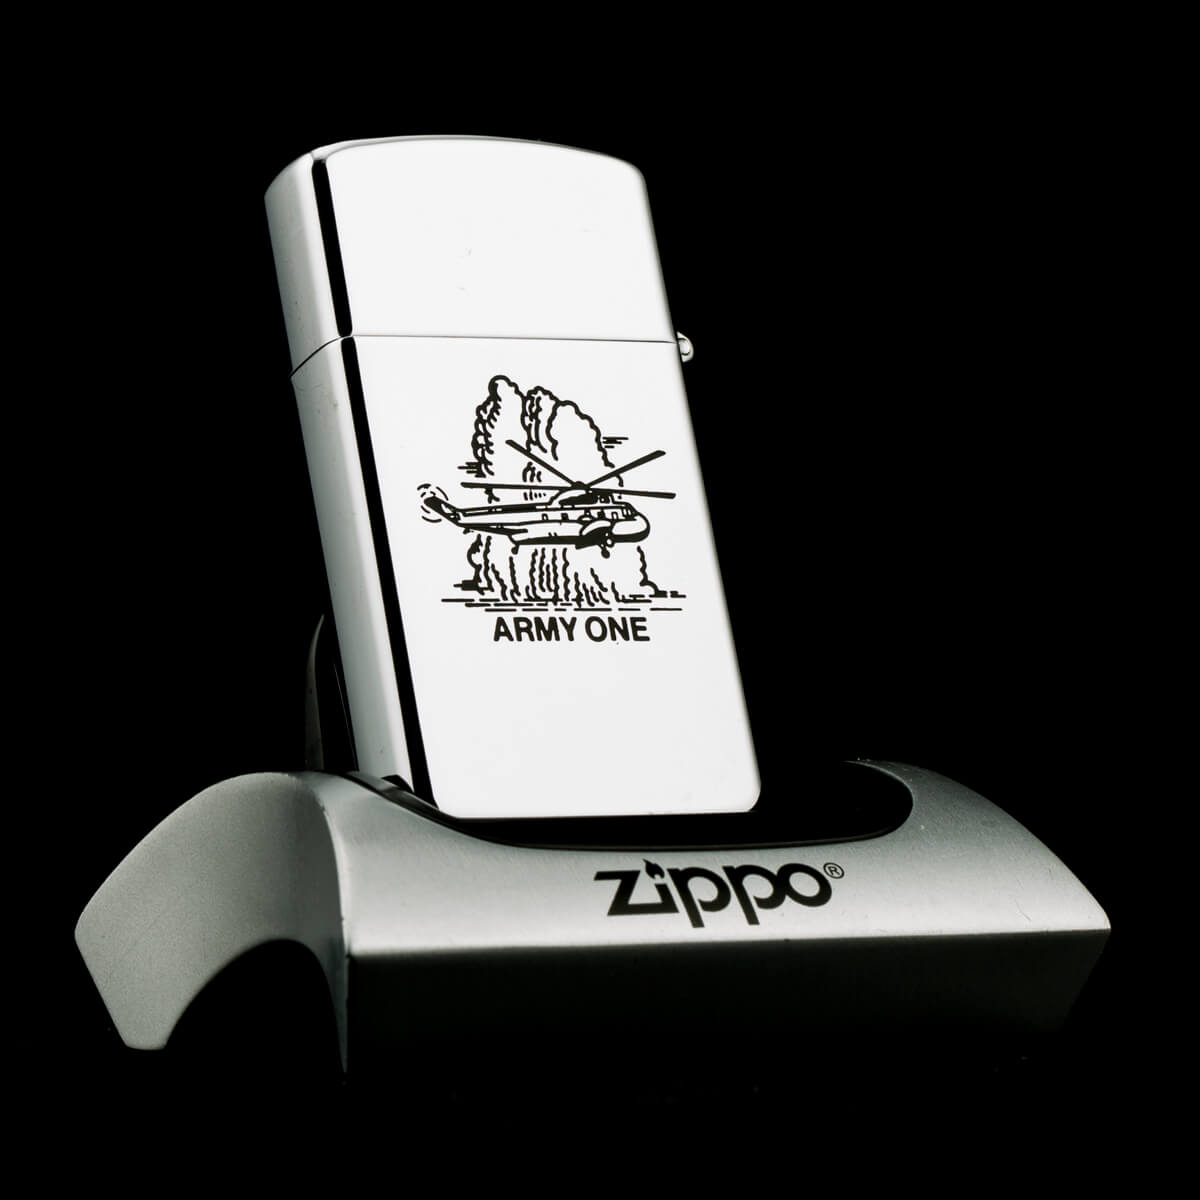 hop-quet-zippo-army-one-seal-of-president-of-the-united-states-iv-1998-huy-hieu-tong-thong-my